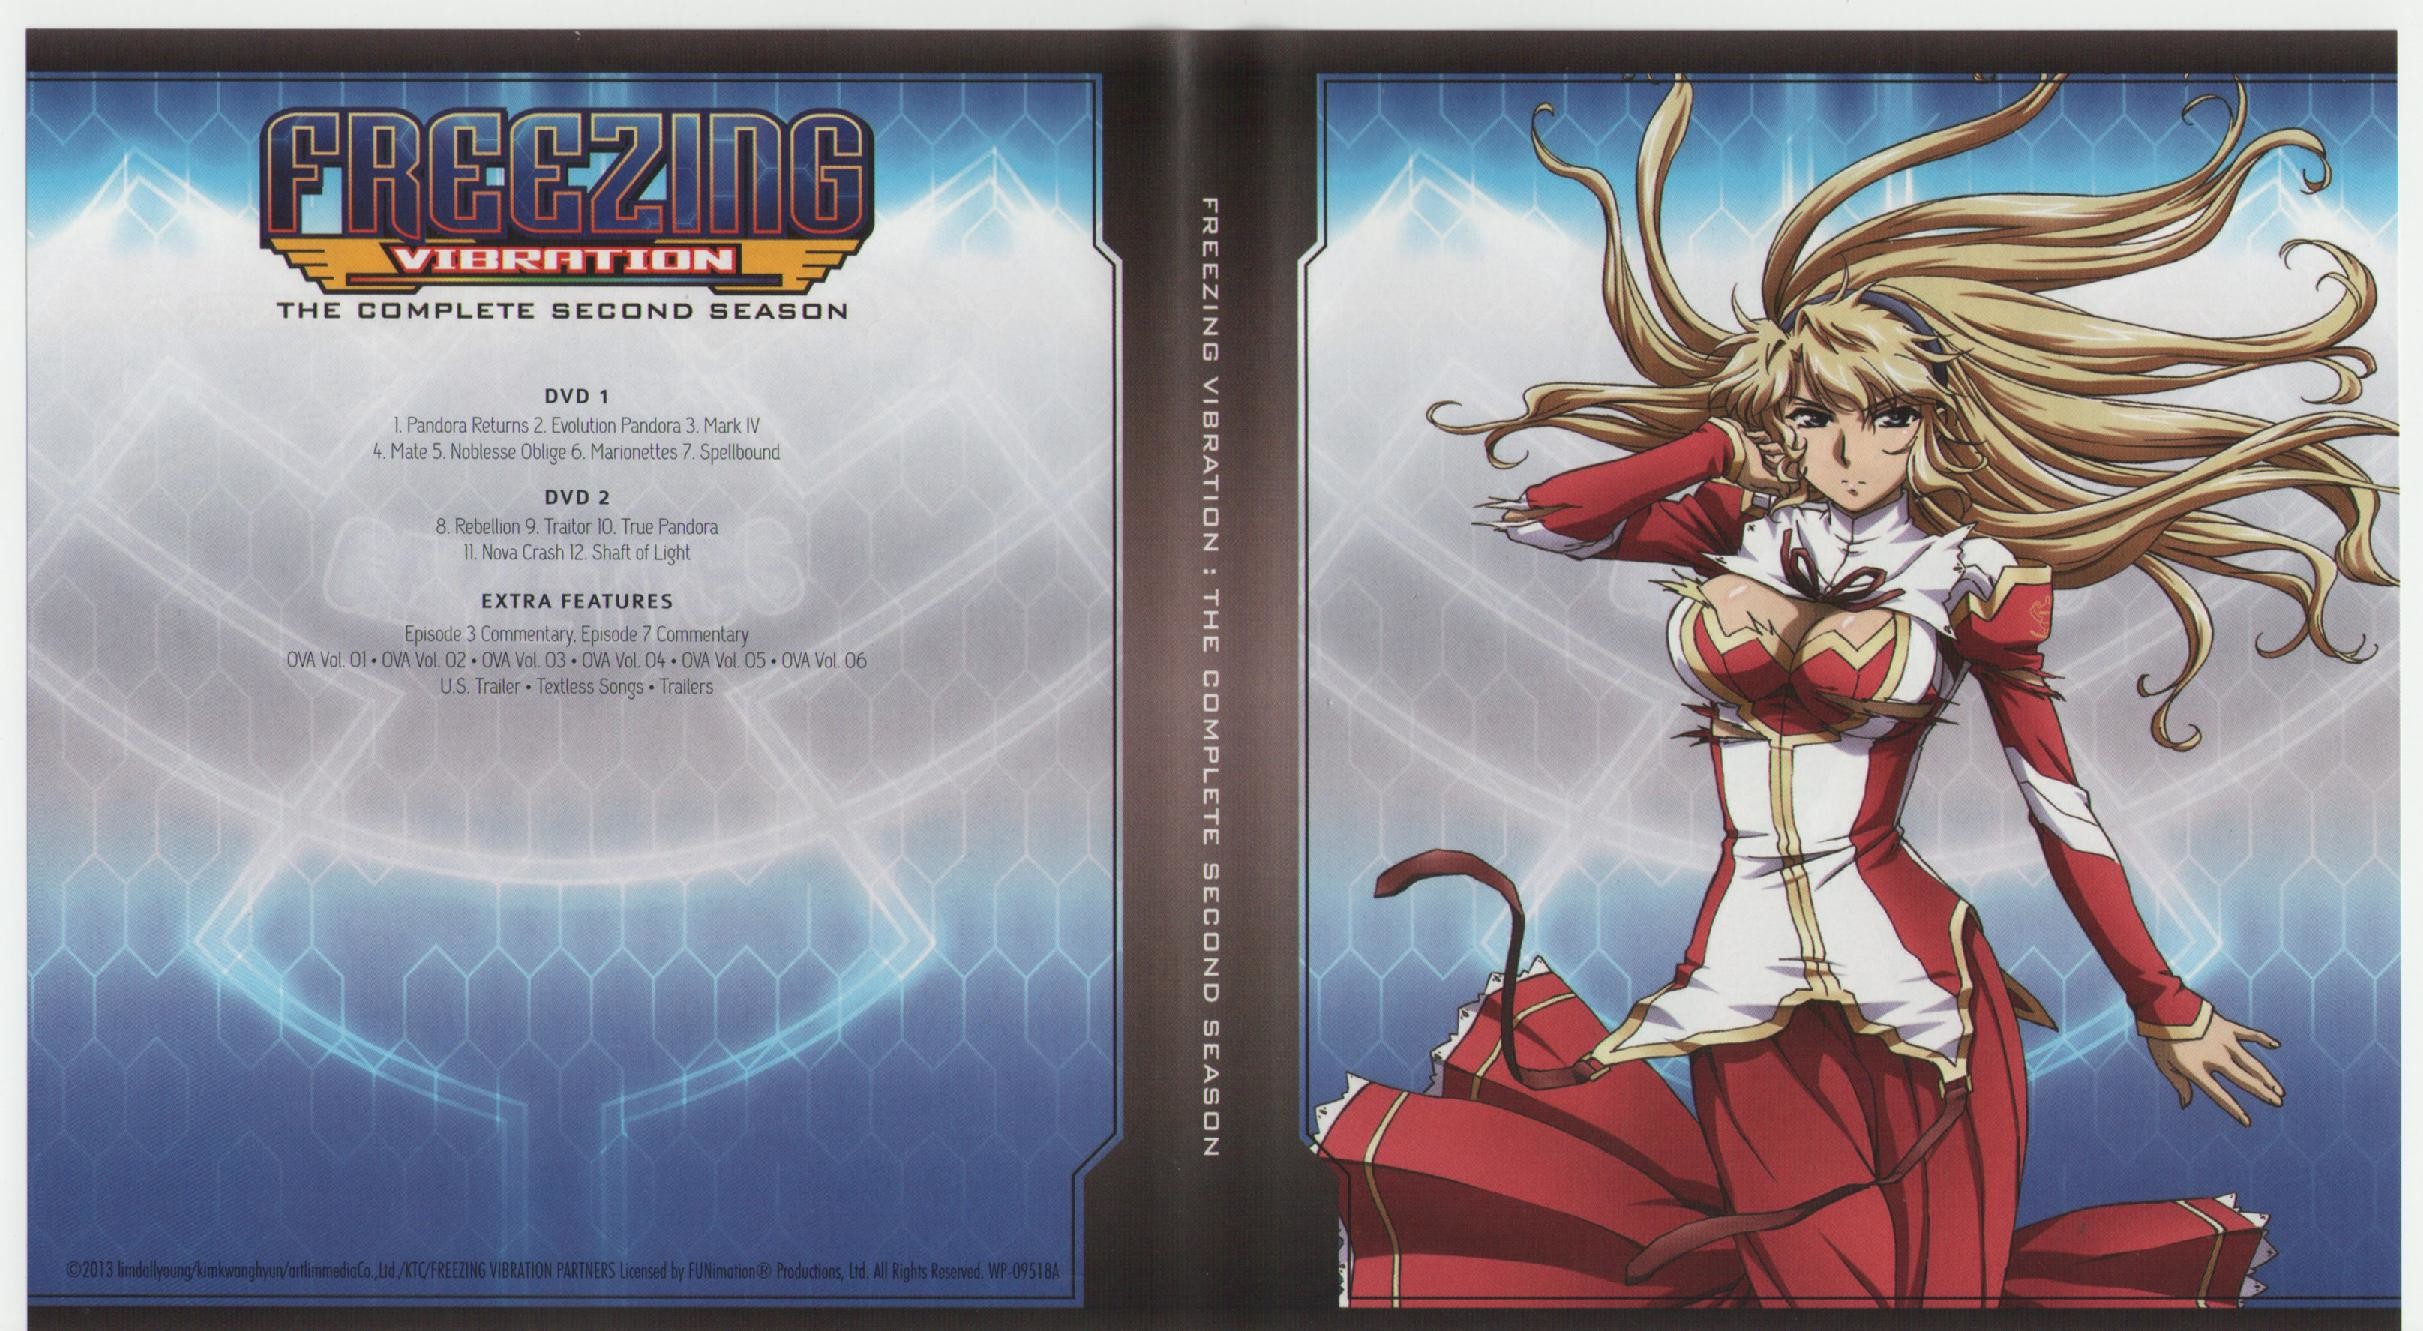 2423x1331 Re: Freezing Vibration: Complete Collection (Blu-ray / DVD Combo)